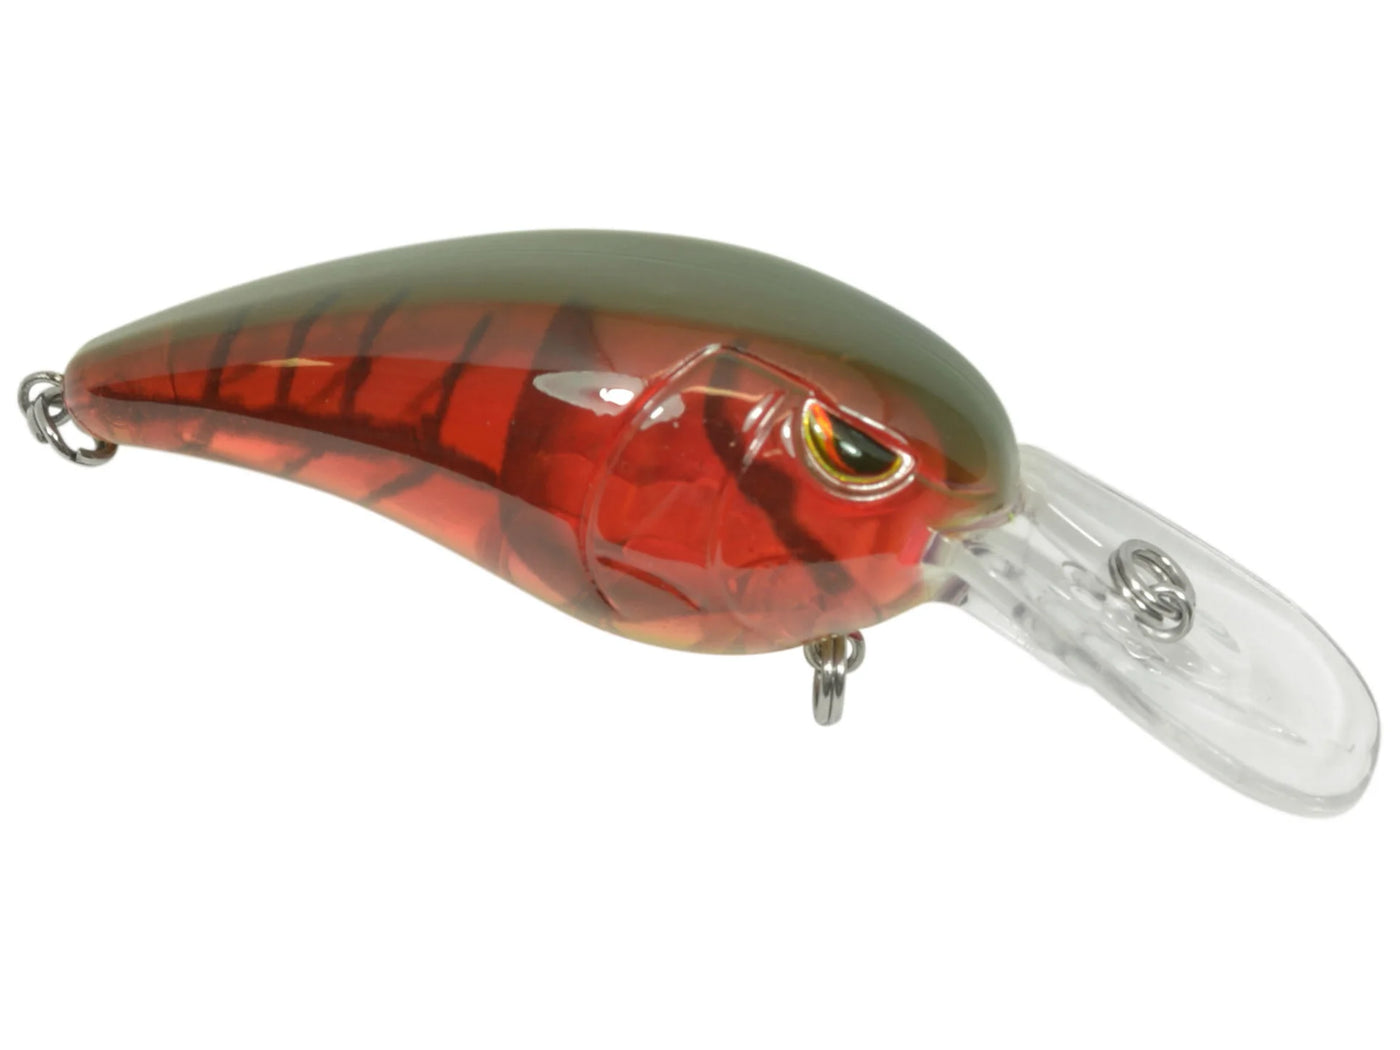 SPRO's Rk Crawler 50DD – A New Smaller Crankbait For Deep Water